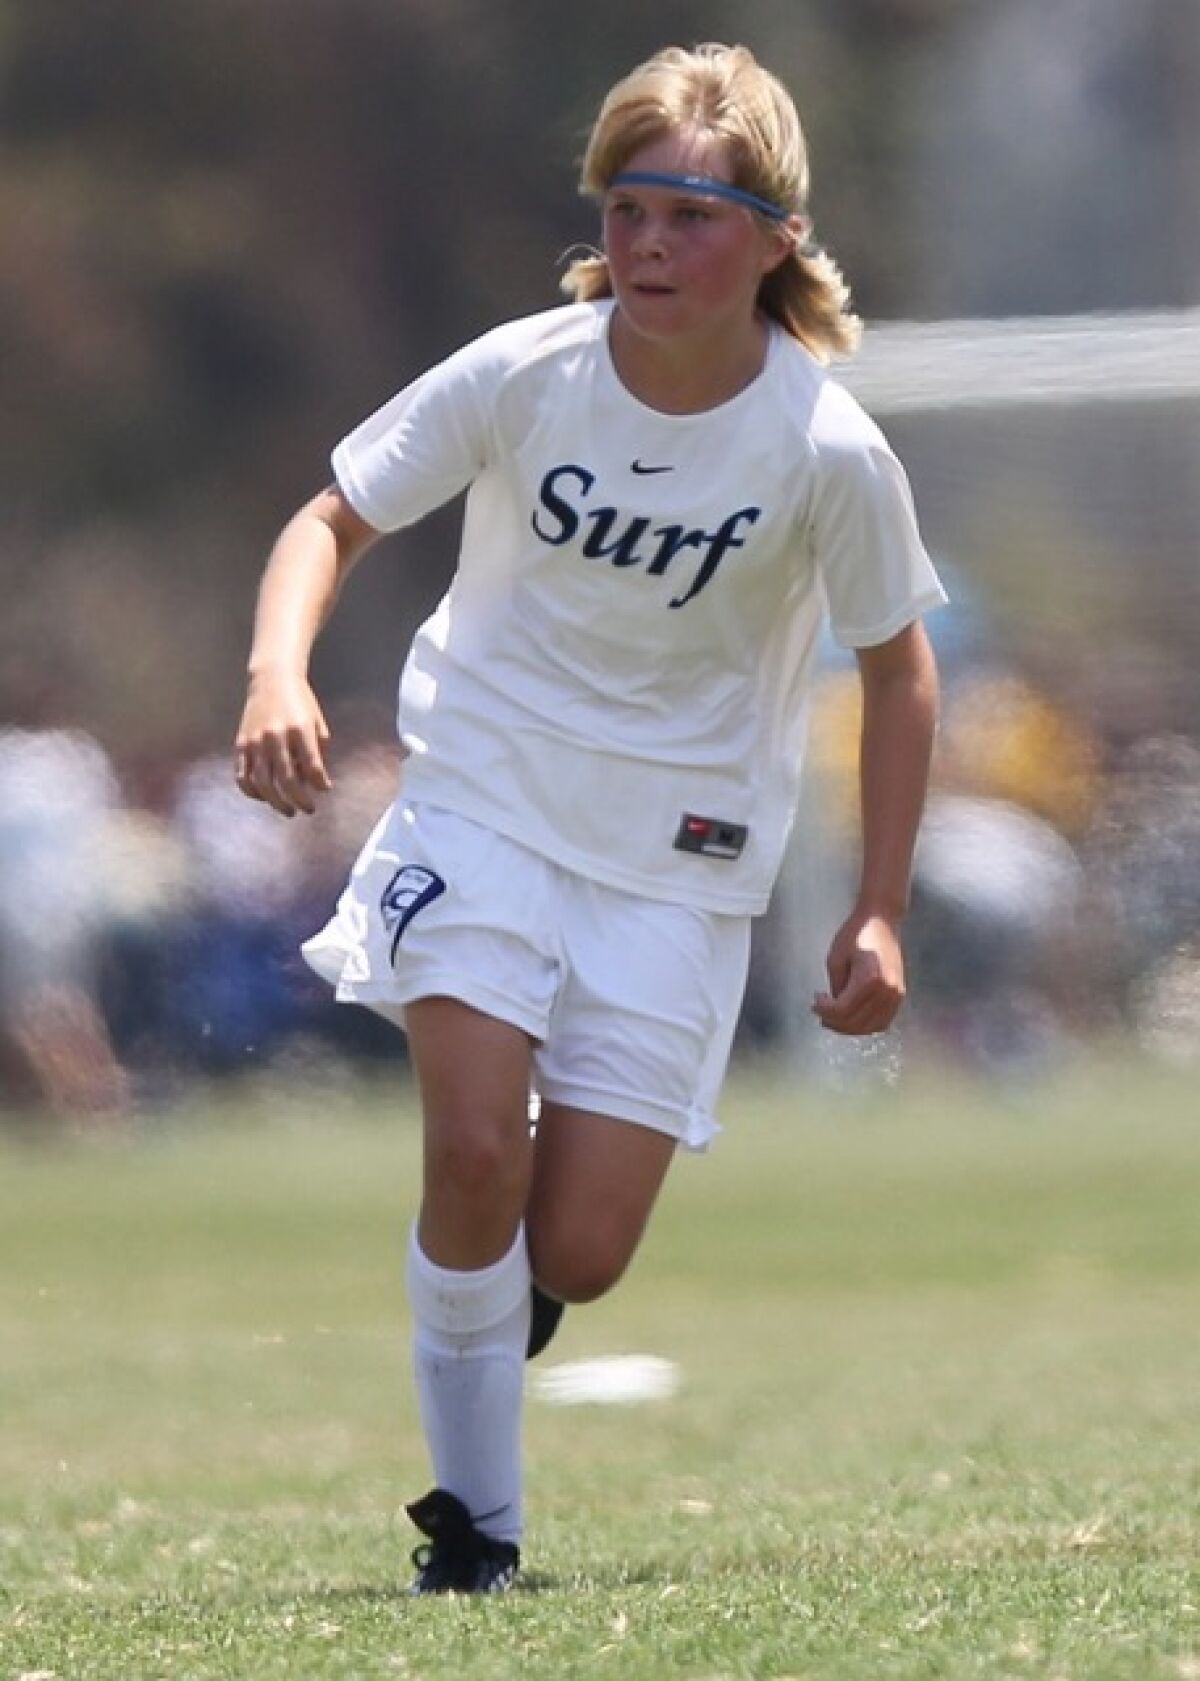 Lucy Rickerson played youth soccer for Surf.